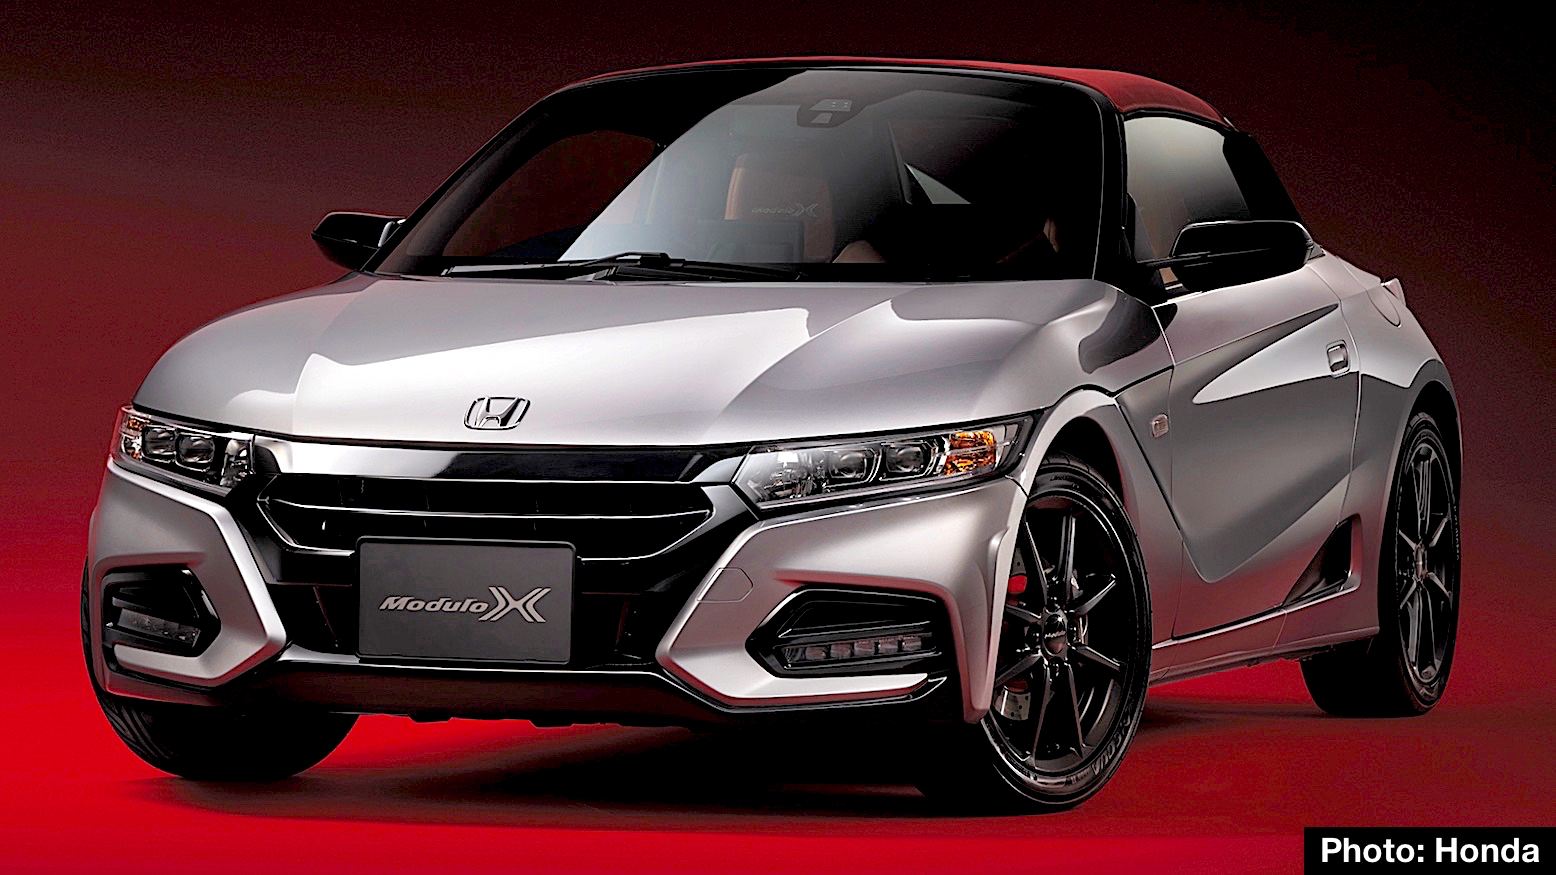 Honda S660 Modulo X Preview Customizing The Mid Engine Roadster In Japan Carnichiwa